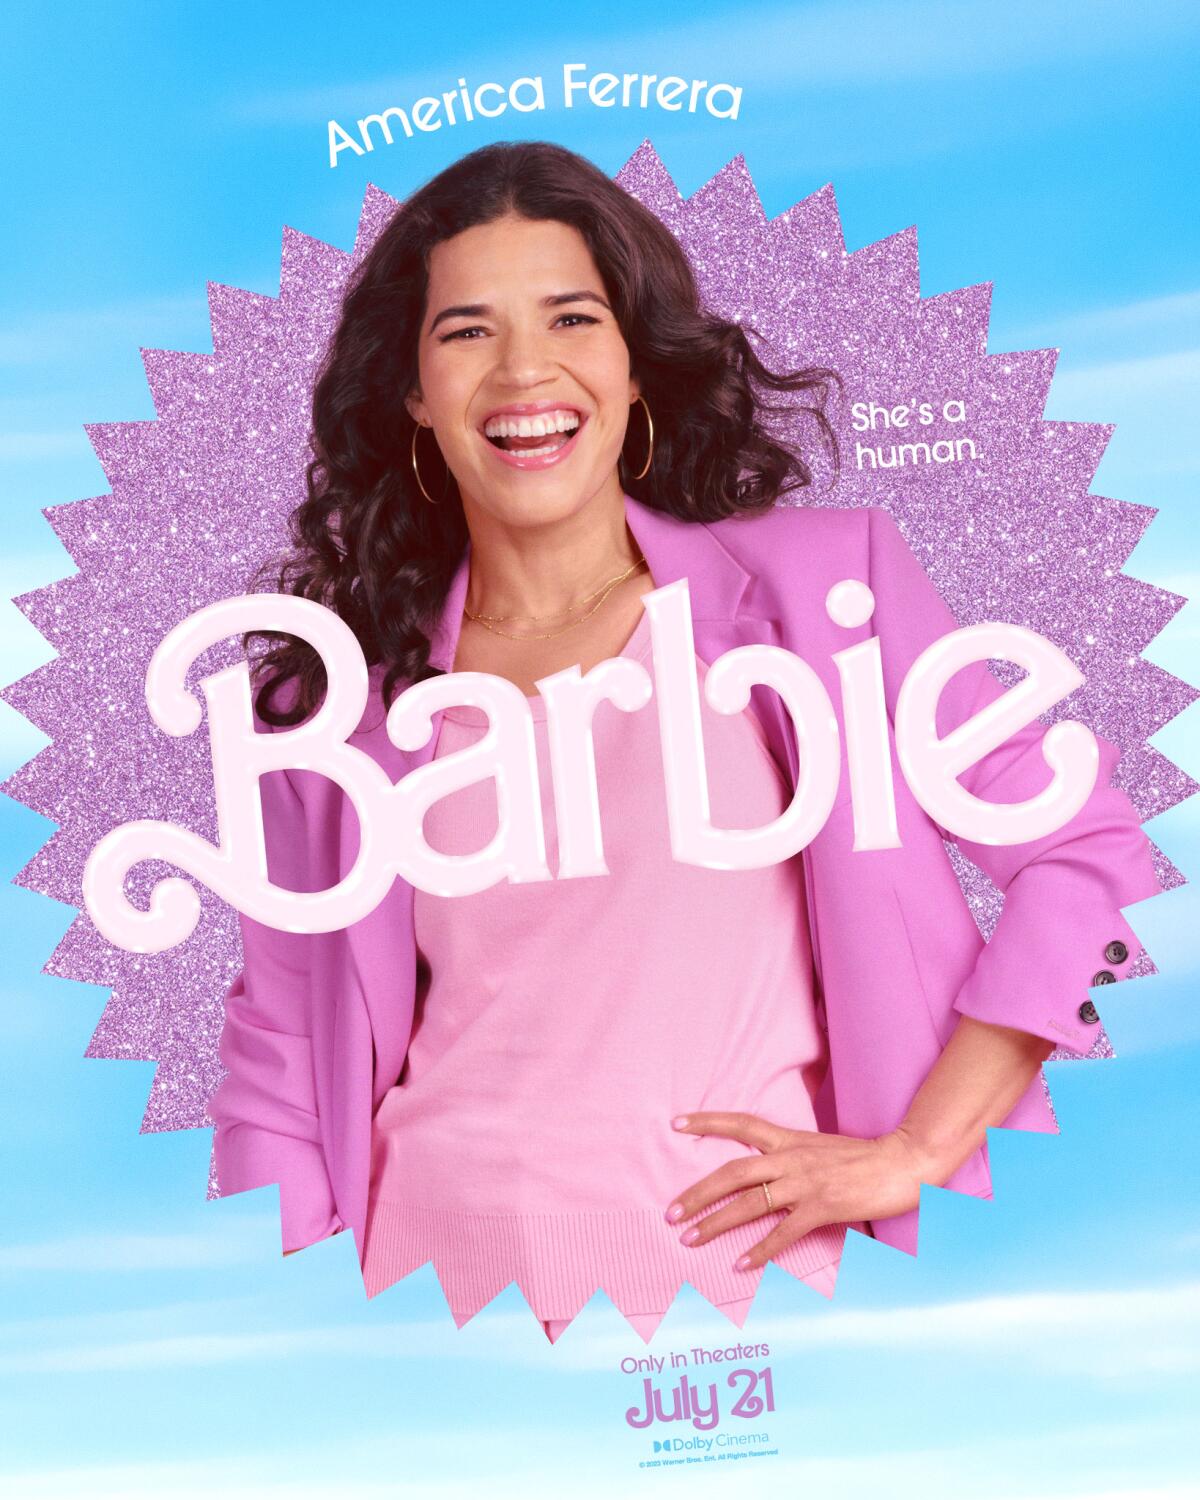 America Ferrera, wearing a pink shirt and blazer, smiles and places her hand on her hip in a movie poster for "Barbie."